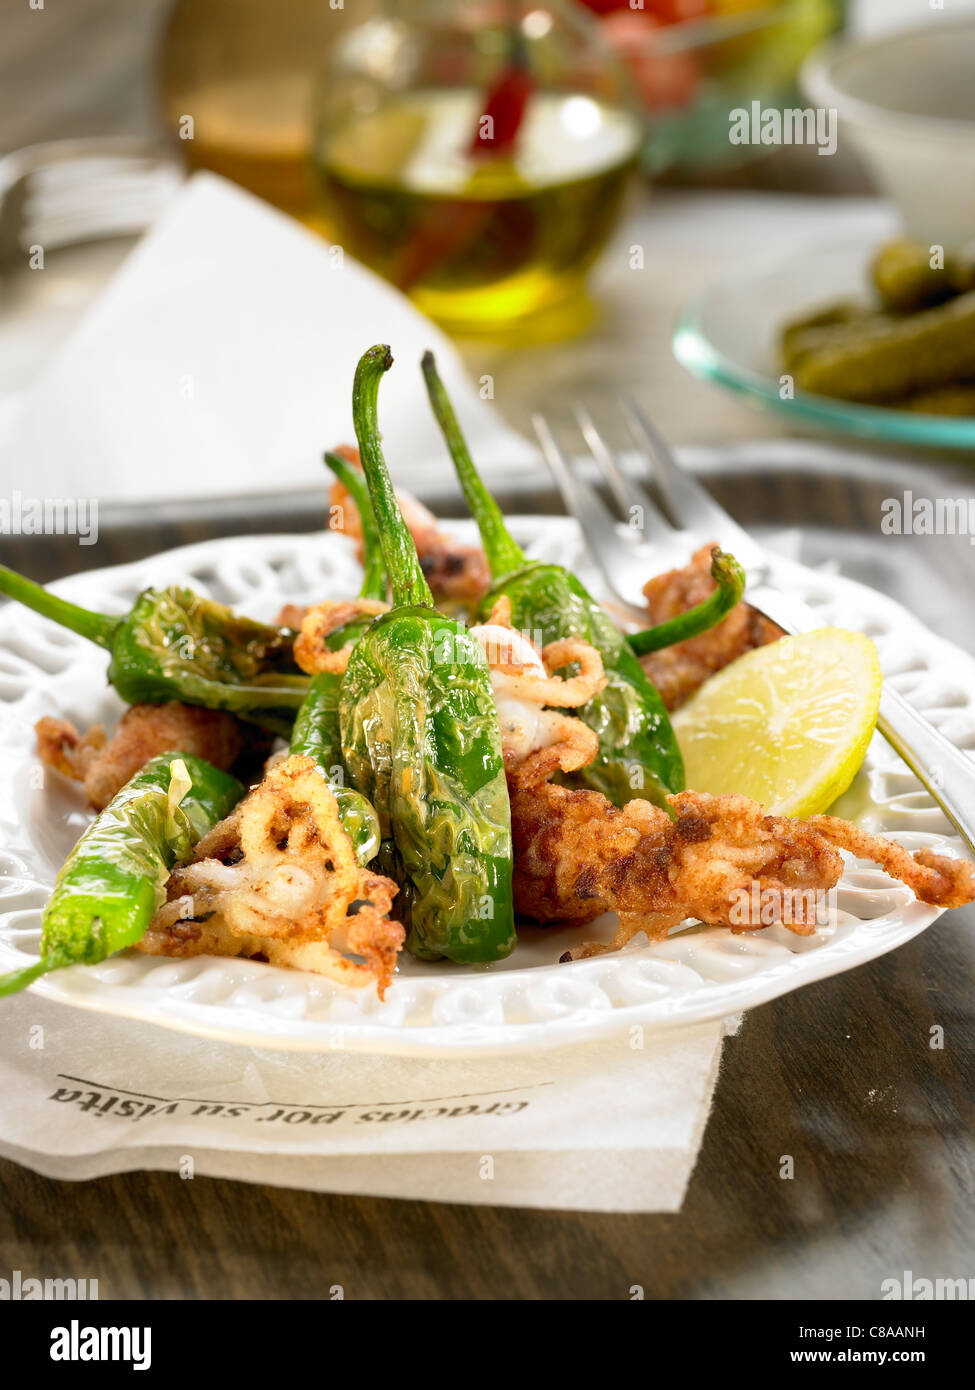 Fried green peppers and breaded calameries Stock Photo